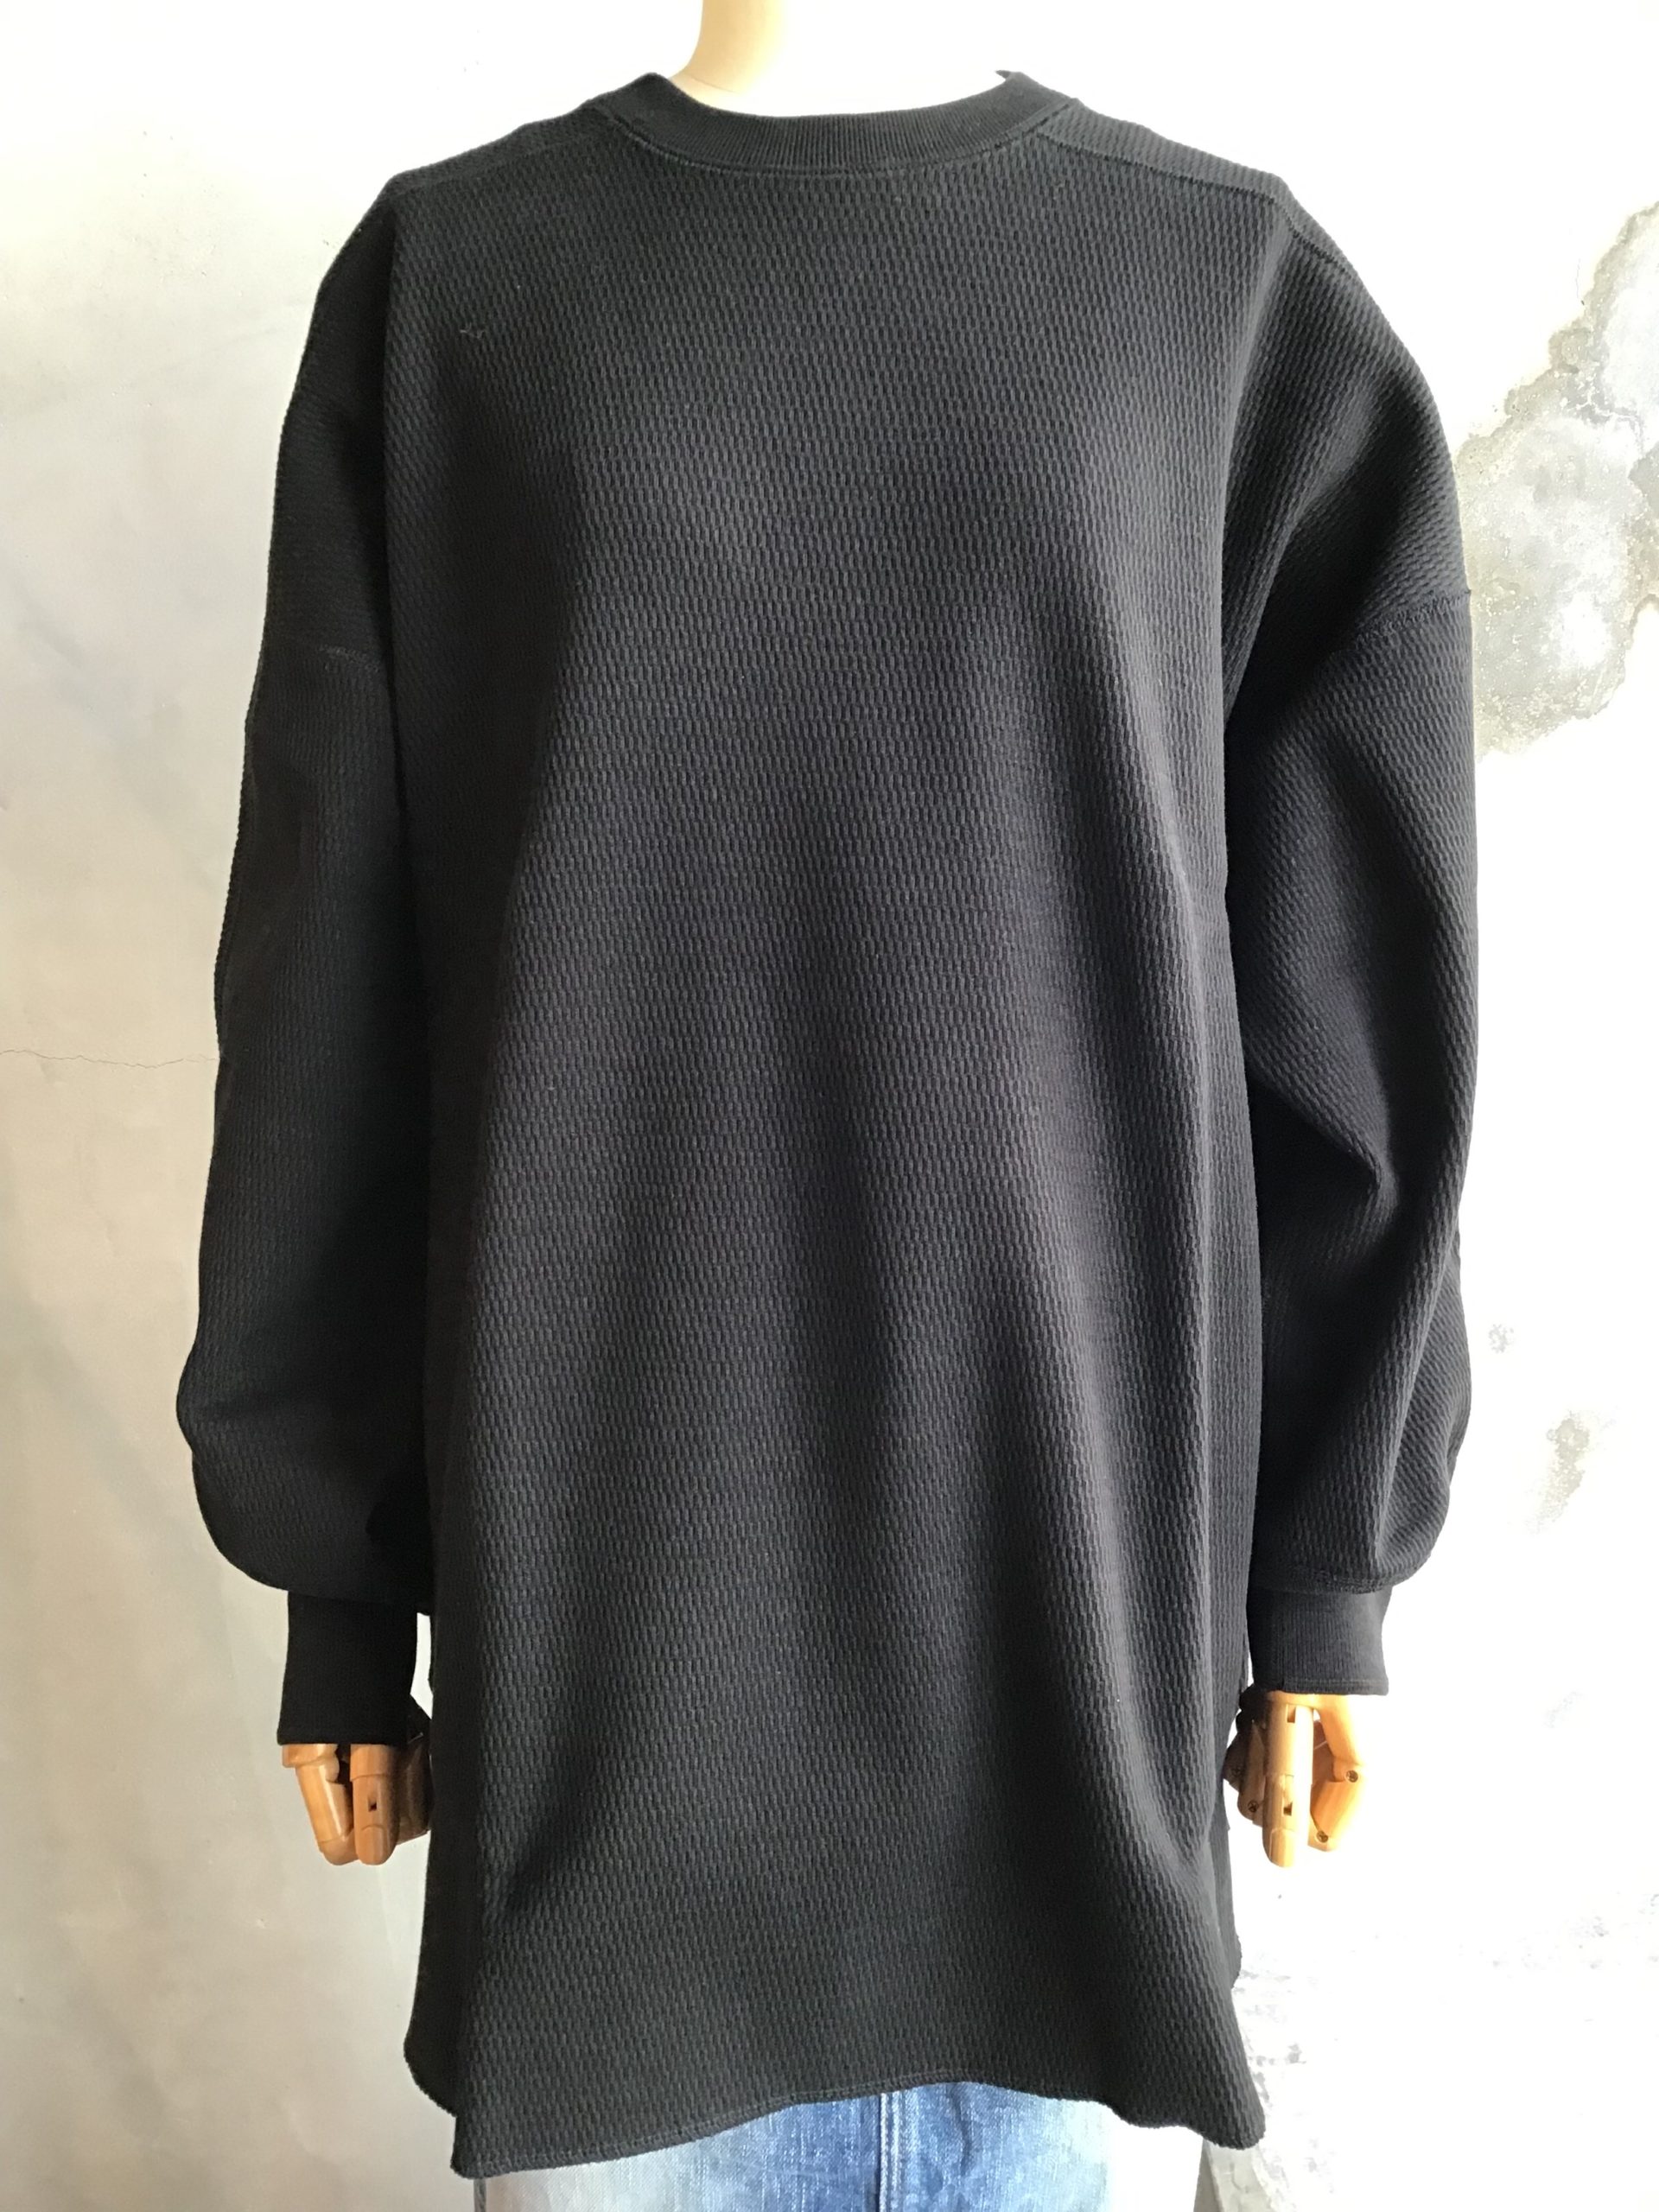 sold out【HYKE】THERMAL SHIRT / BIG FIT | 沖縄那覇市のセレクトショップCreativeQuality